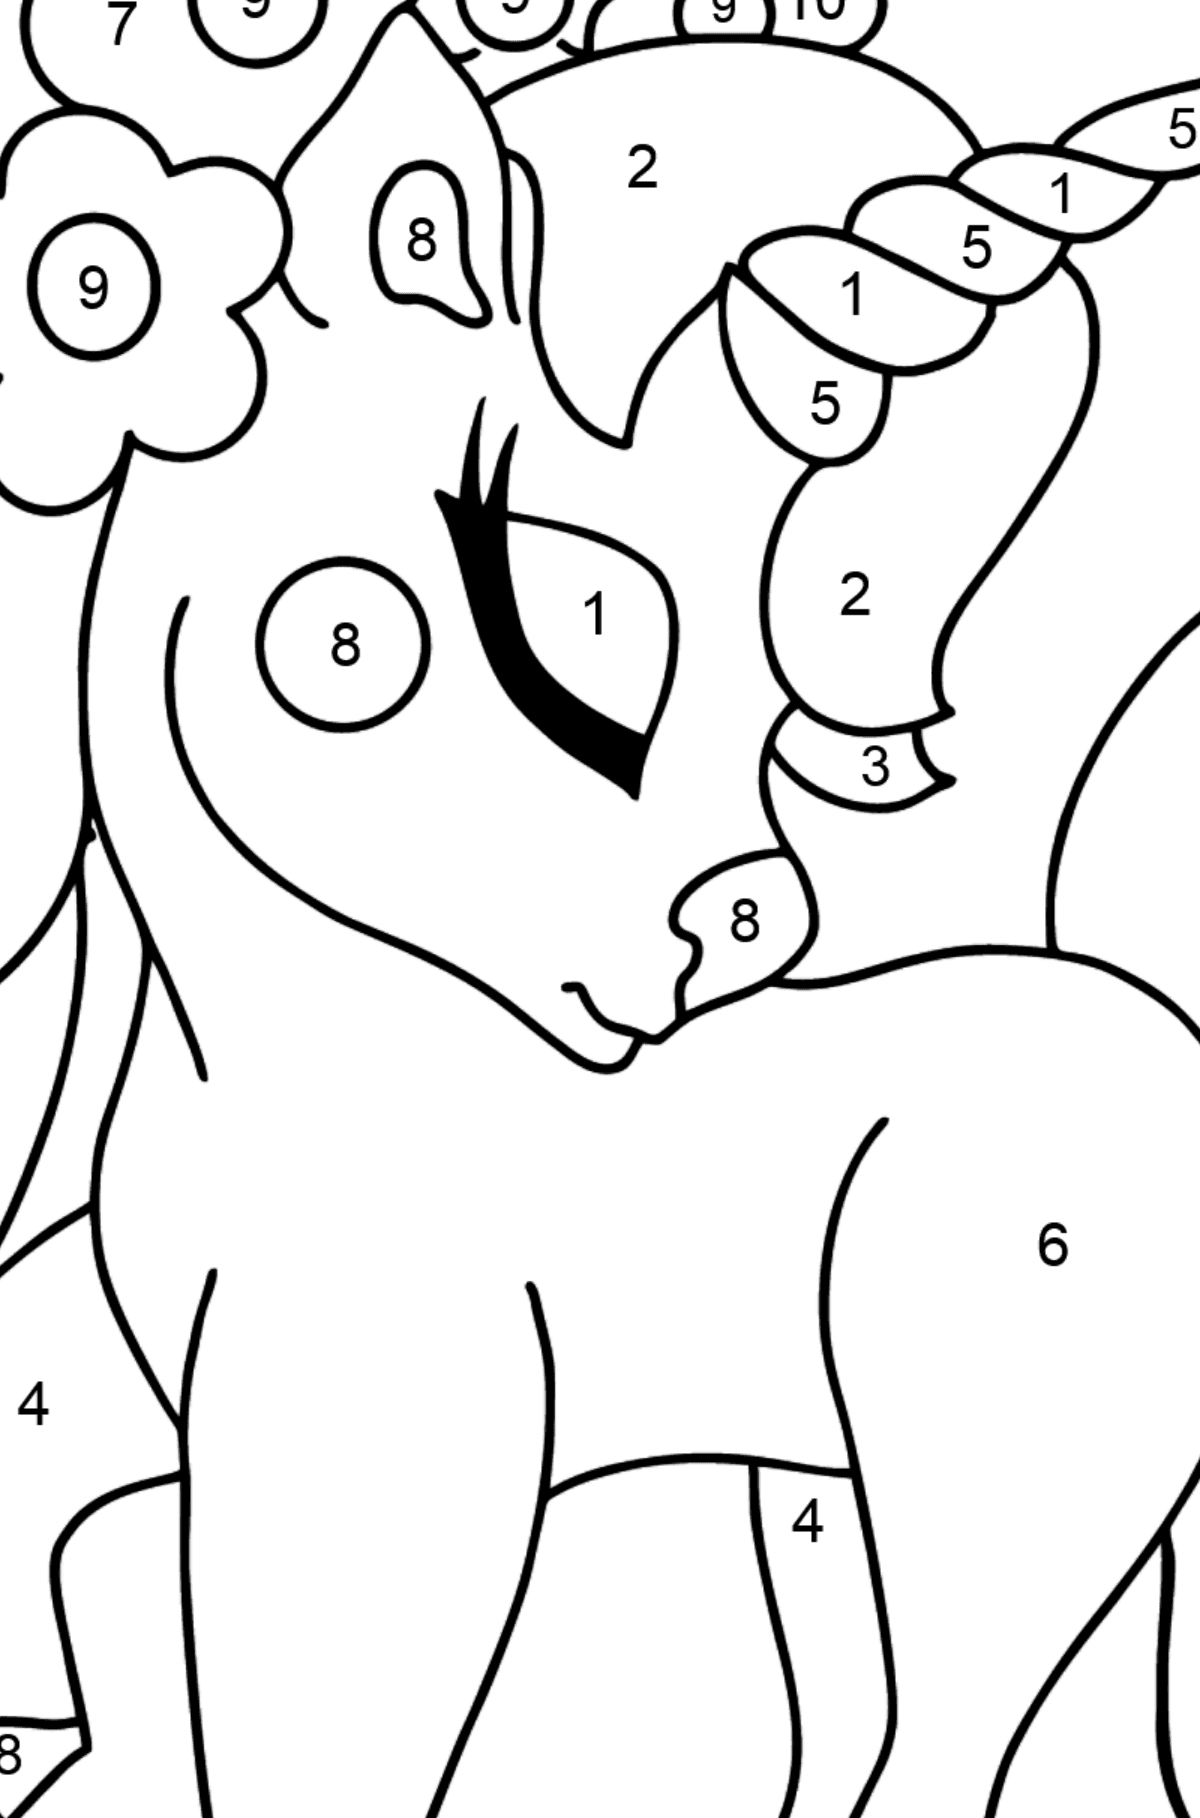 Unicorn in Dreams coloring page - Coloring by Numbers for Kids